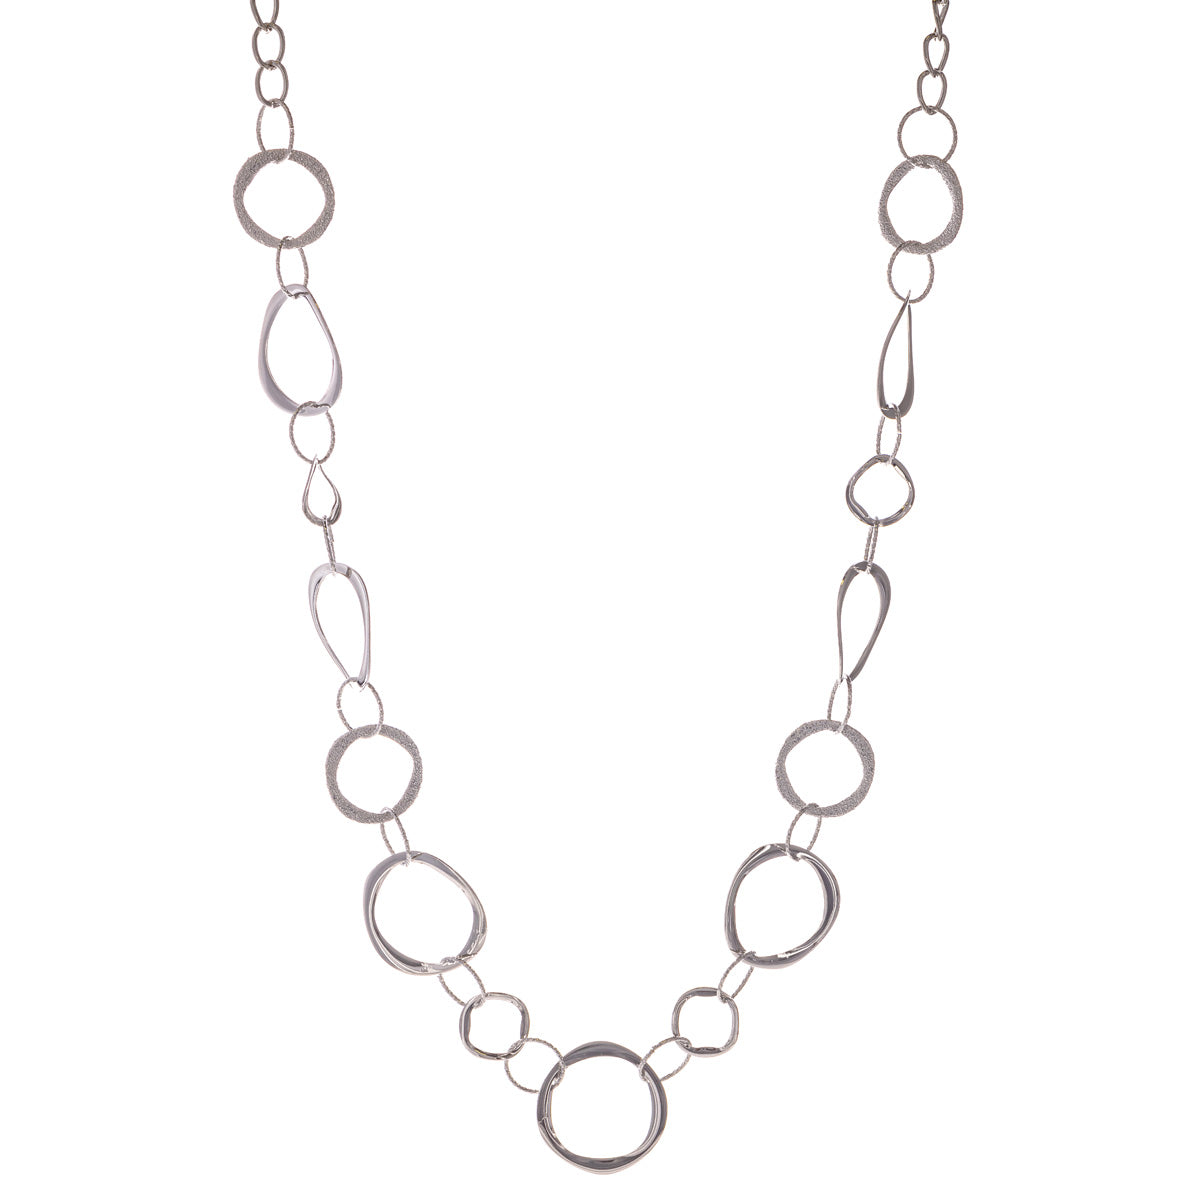 Long necklace with round links 100cm